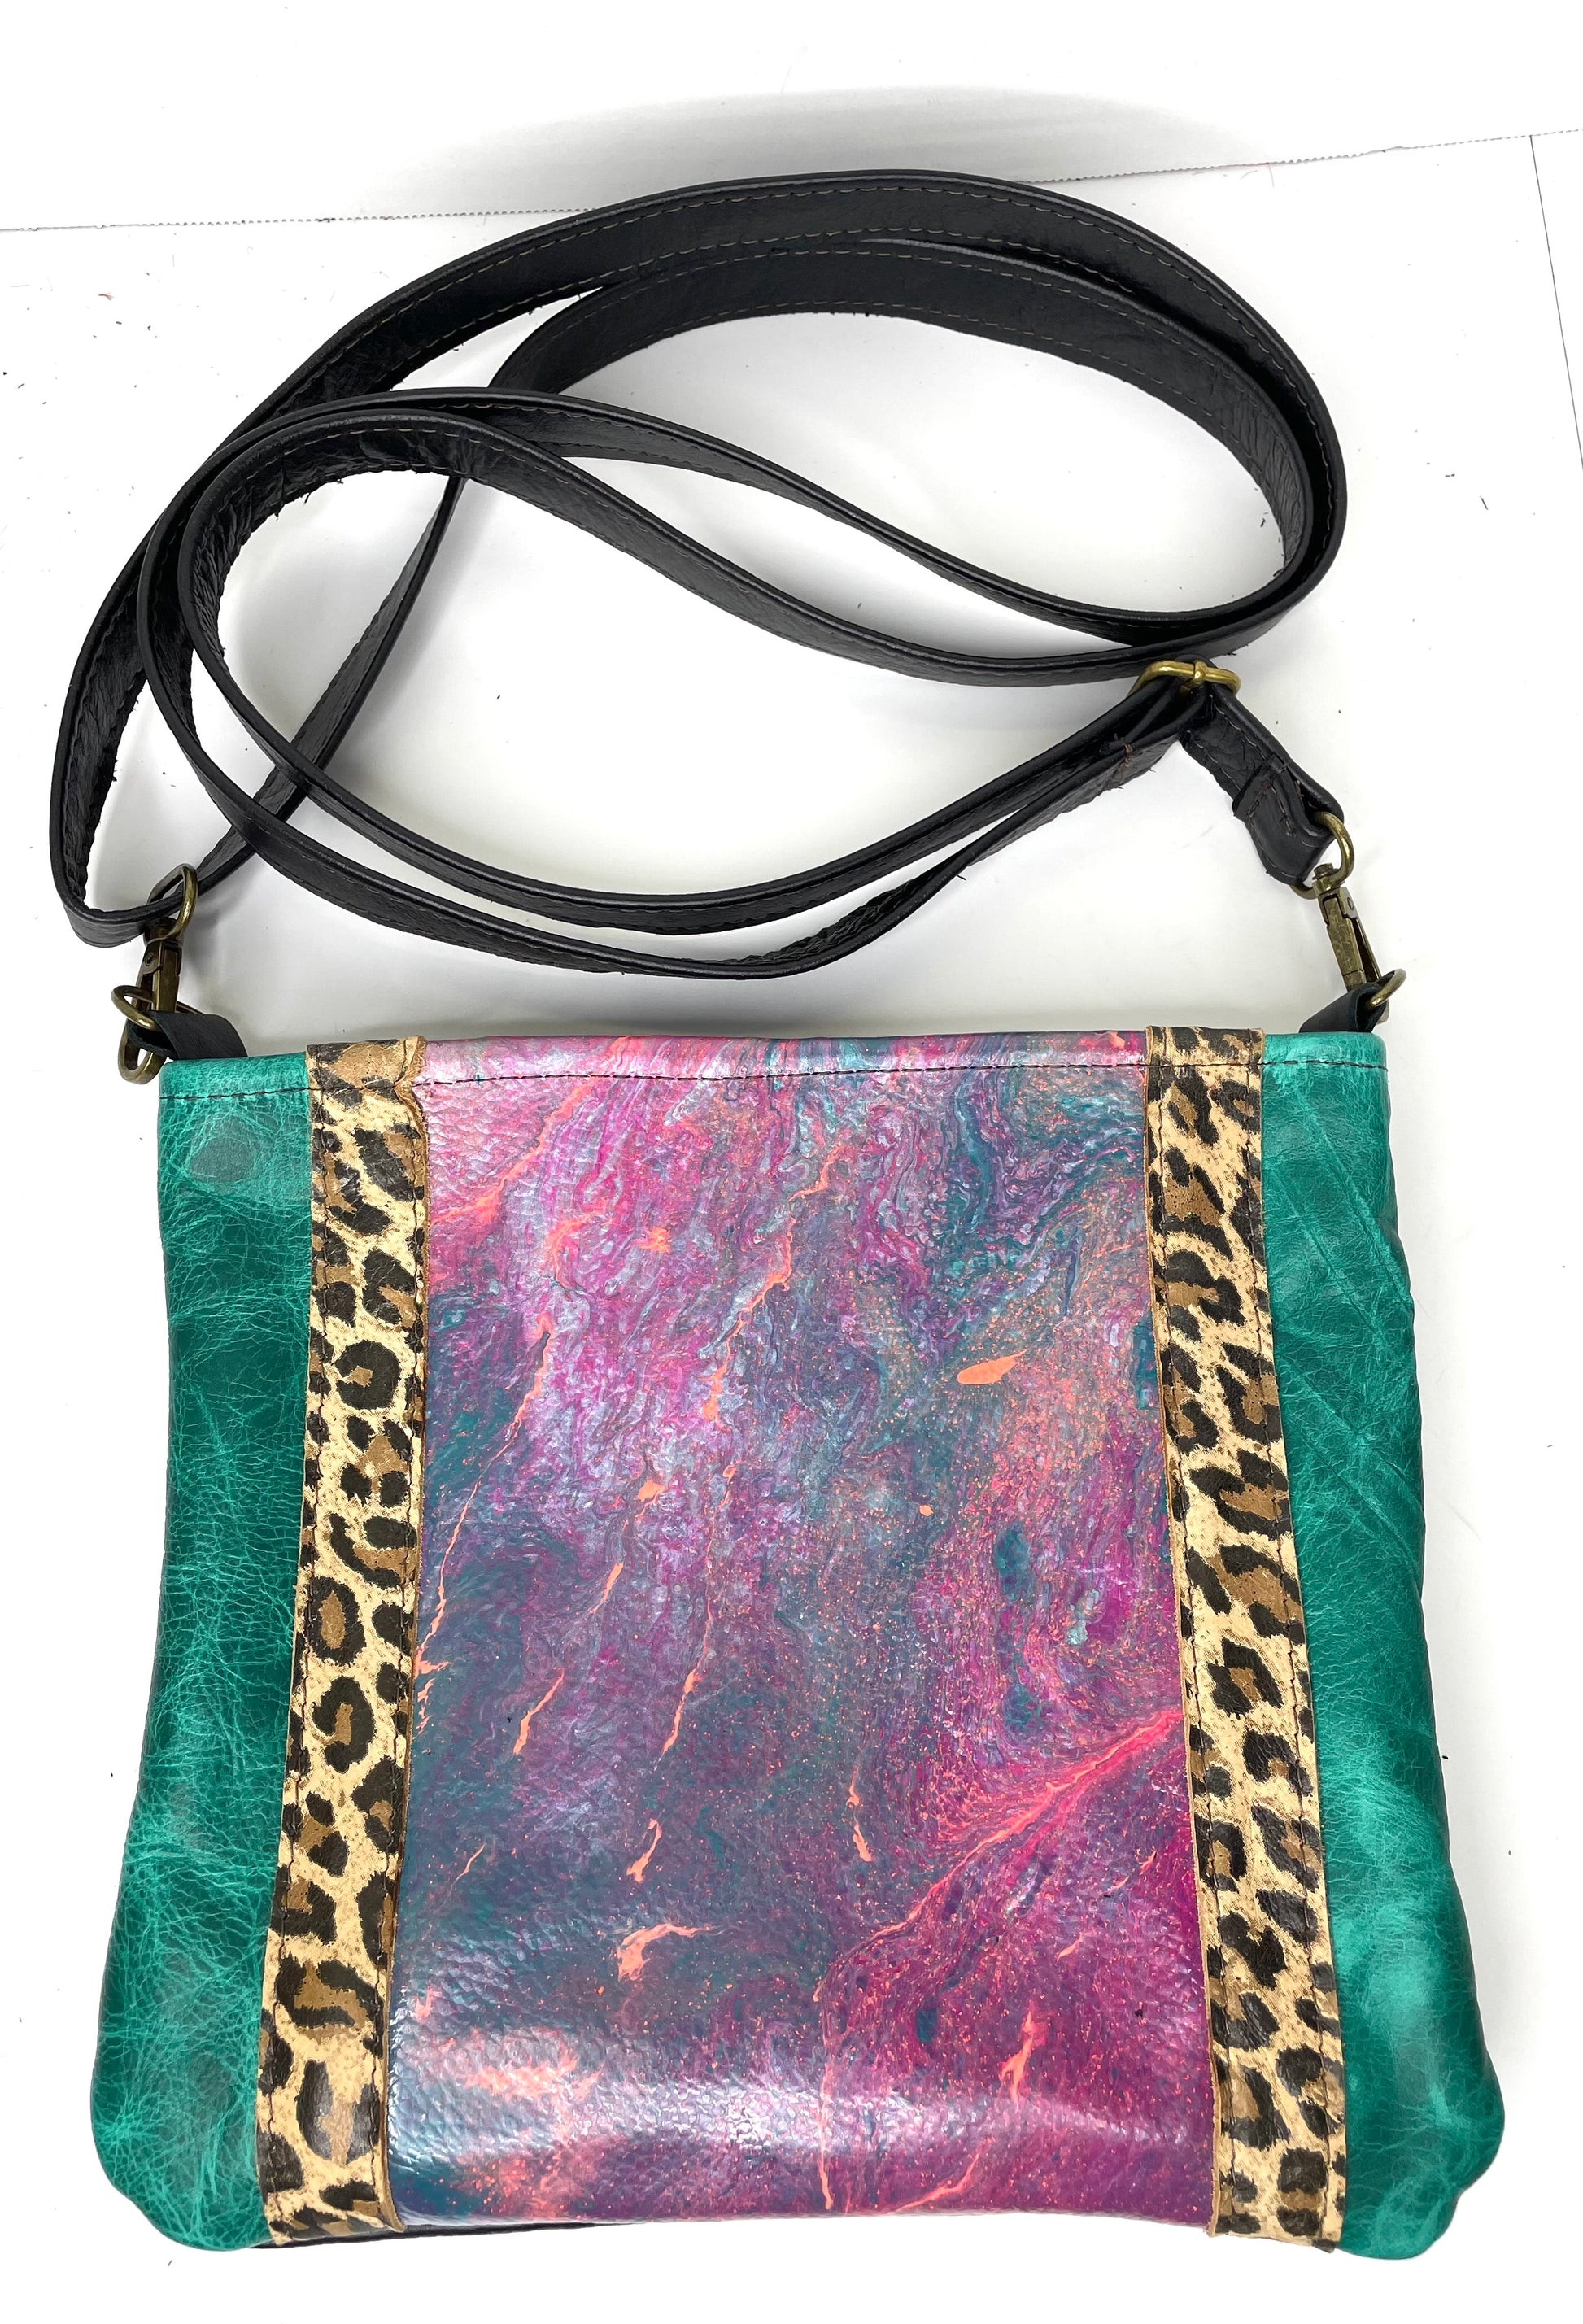 Kaleidoscope Medium Crossbody leopard and turquoise - Patches Of Upcycling